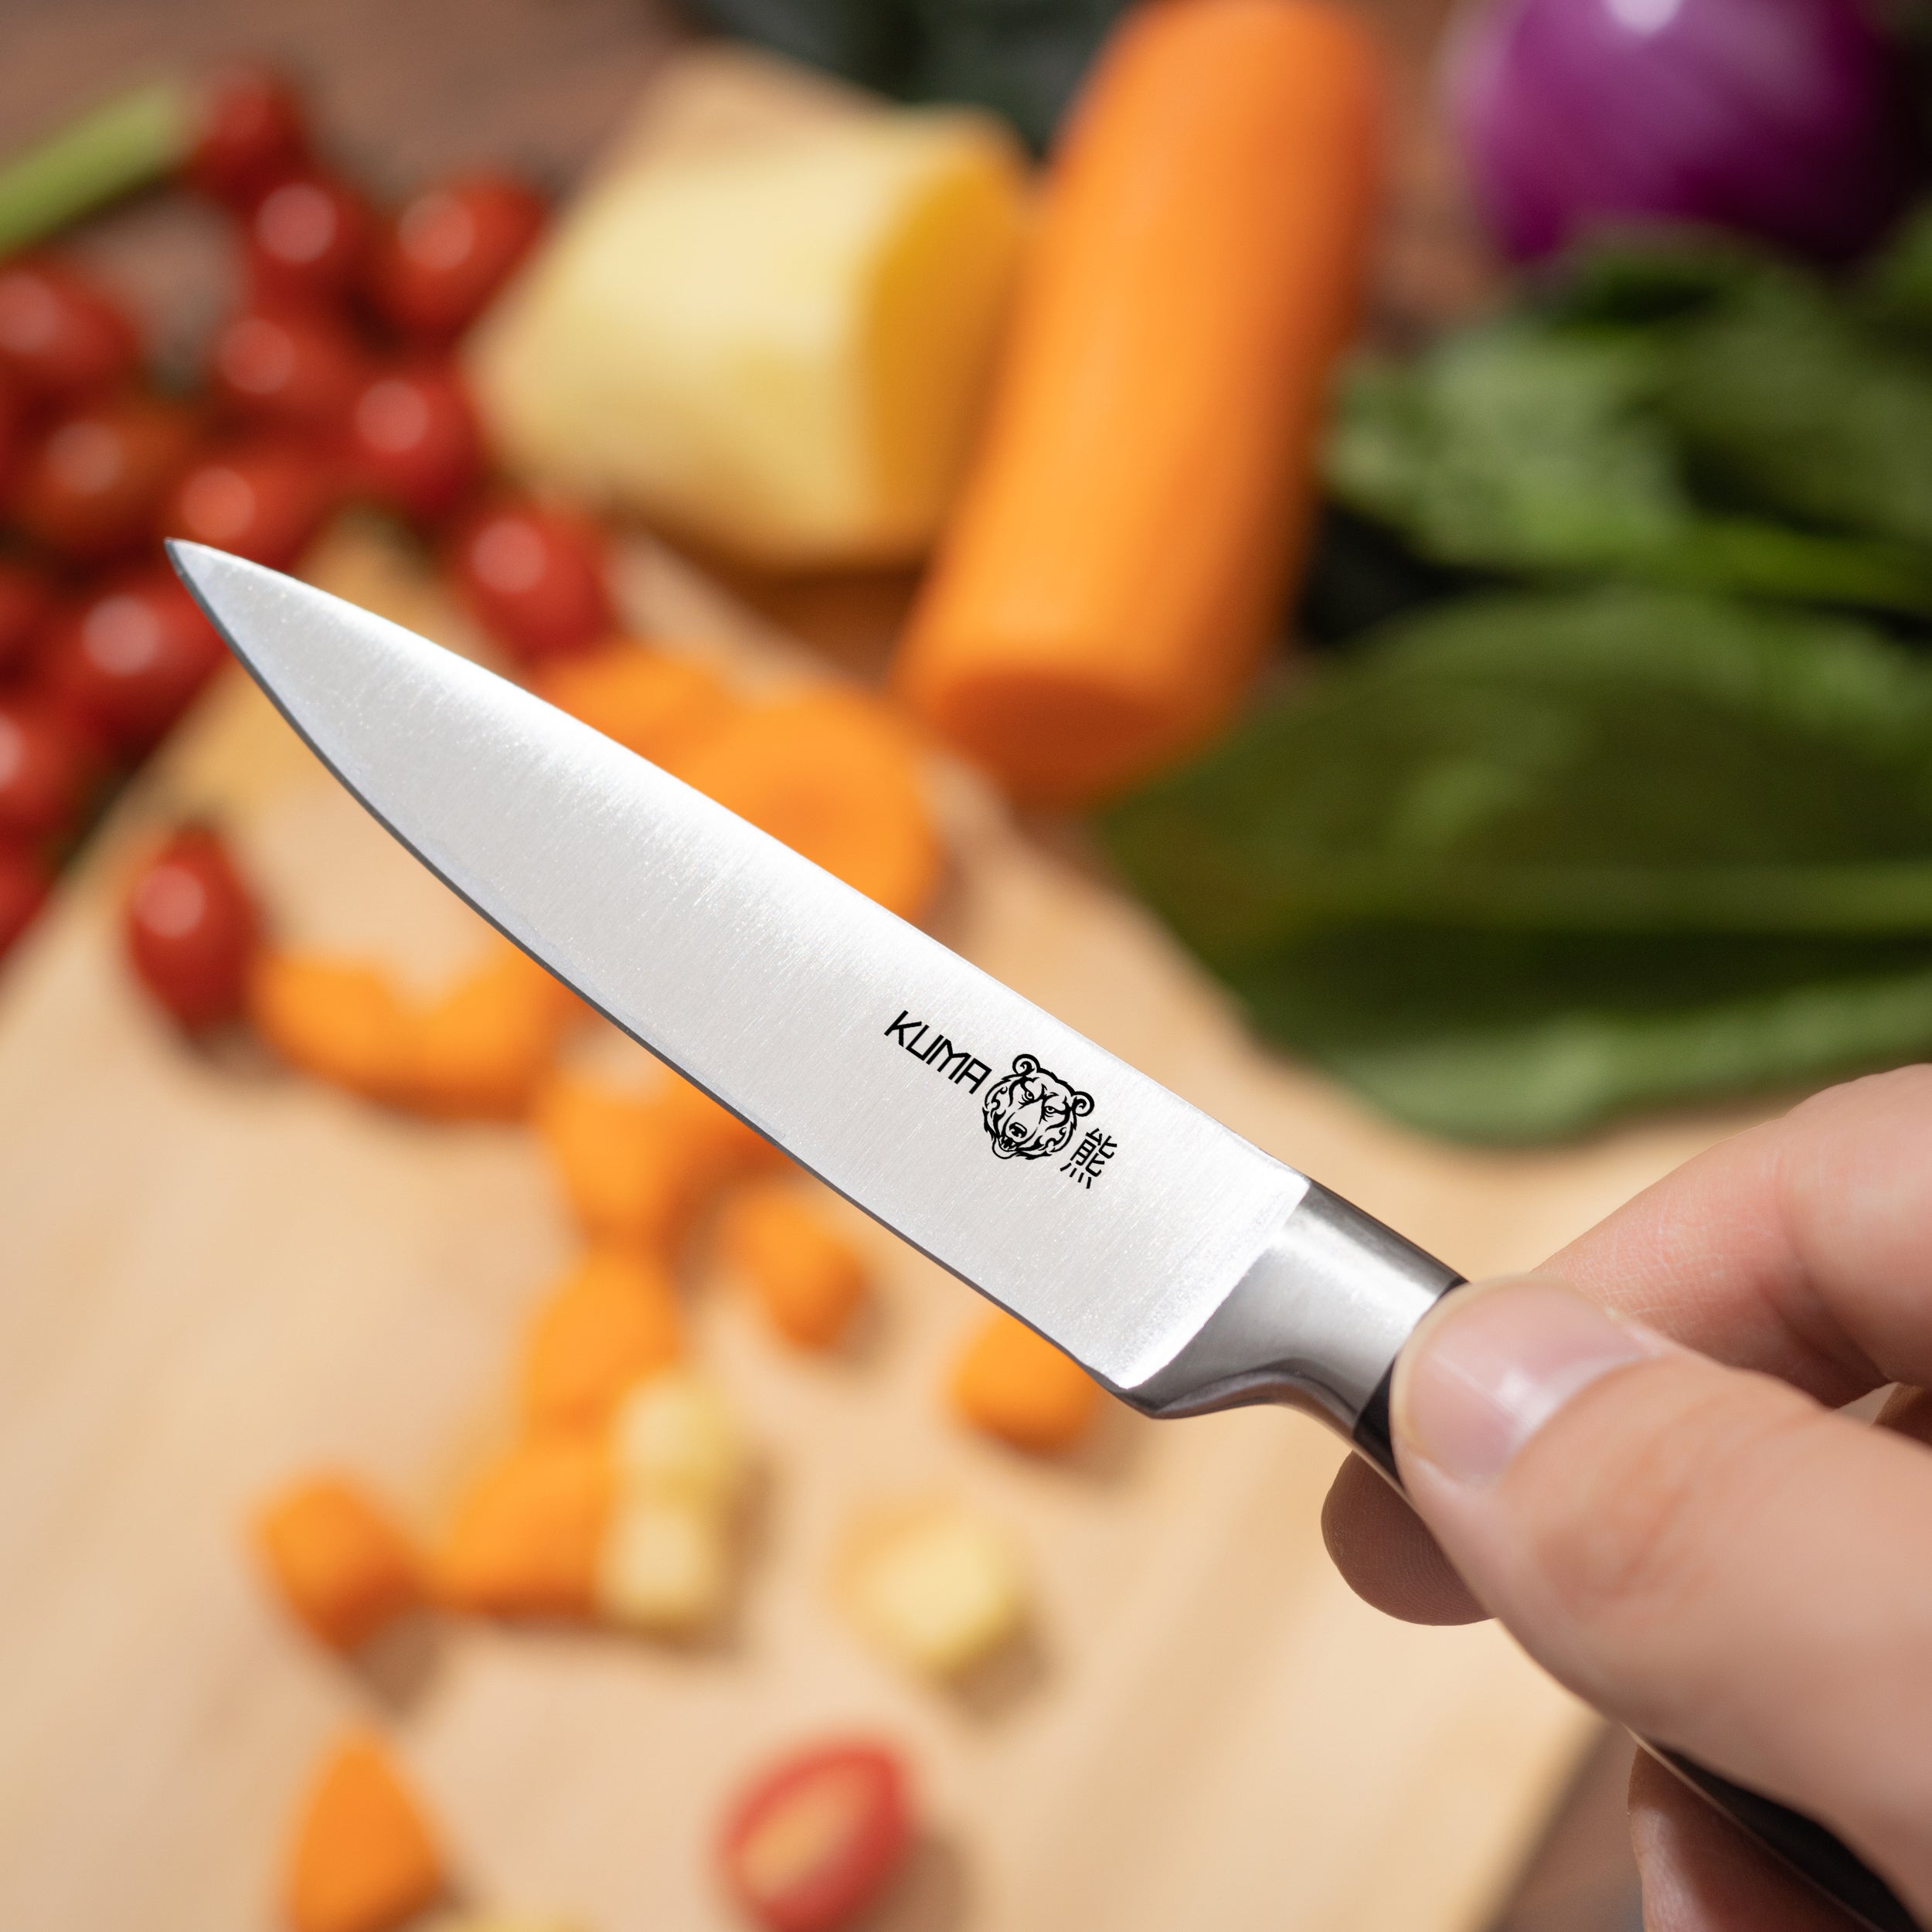 KUMA Multipurpose Chef Knife - 8 Inch Professional Sharp knife - Kitchen  knife For Cutting, Chopping and Dicing With Incomparable Ergonomic Grip